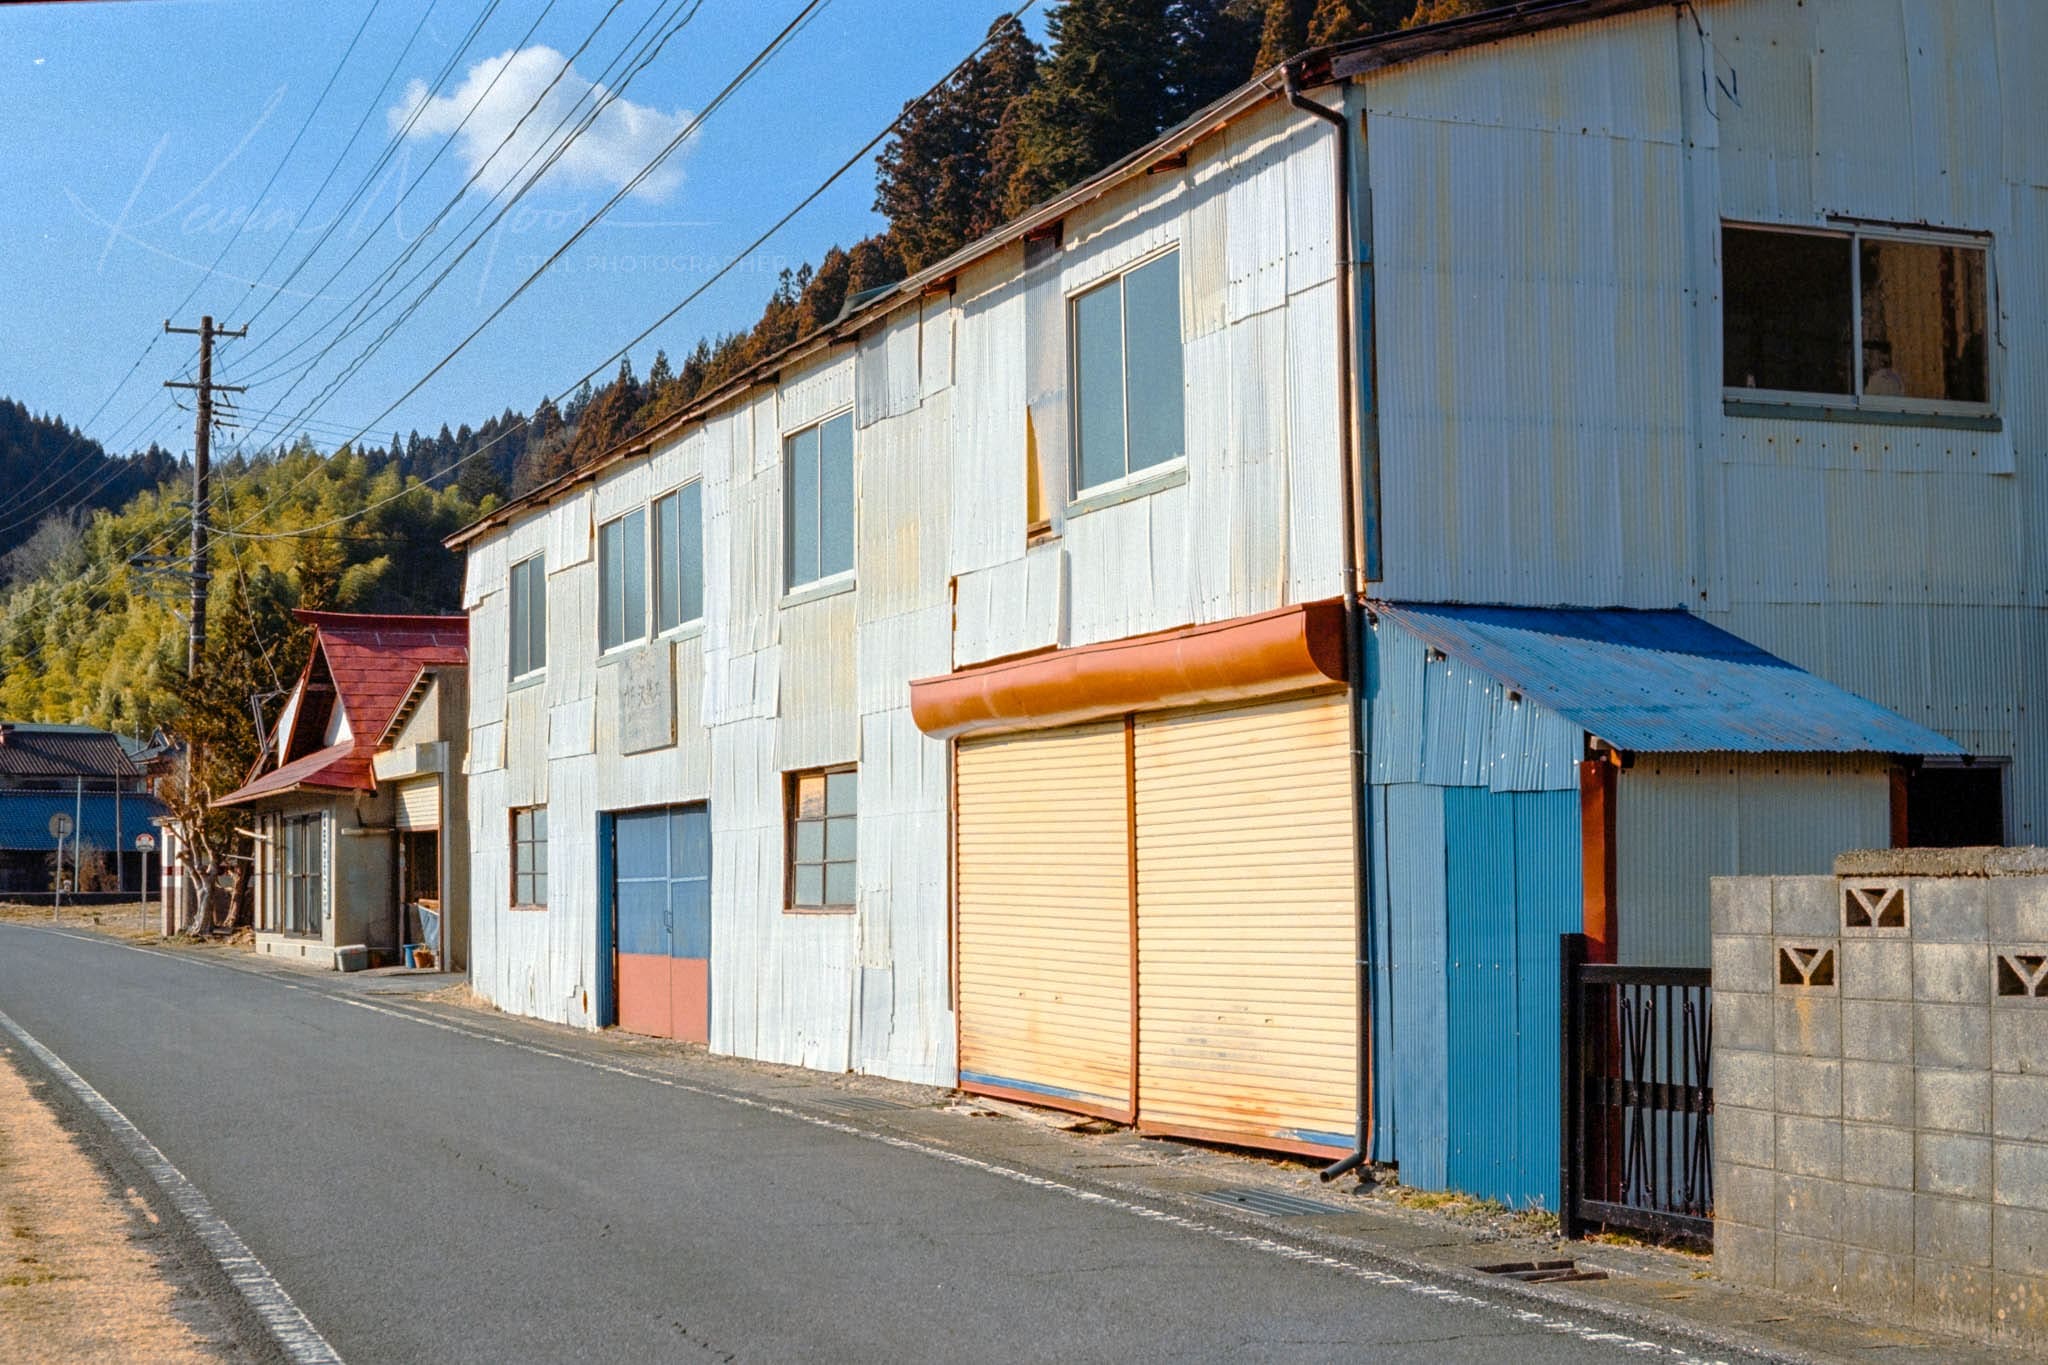 Deserted Street with Weathered Blue Buildings and Red House on Sunny Day